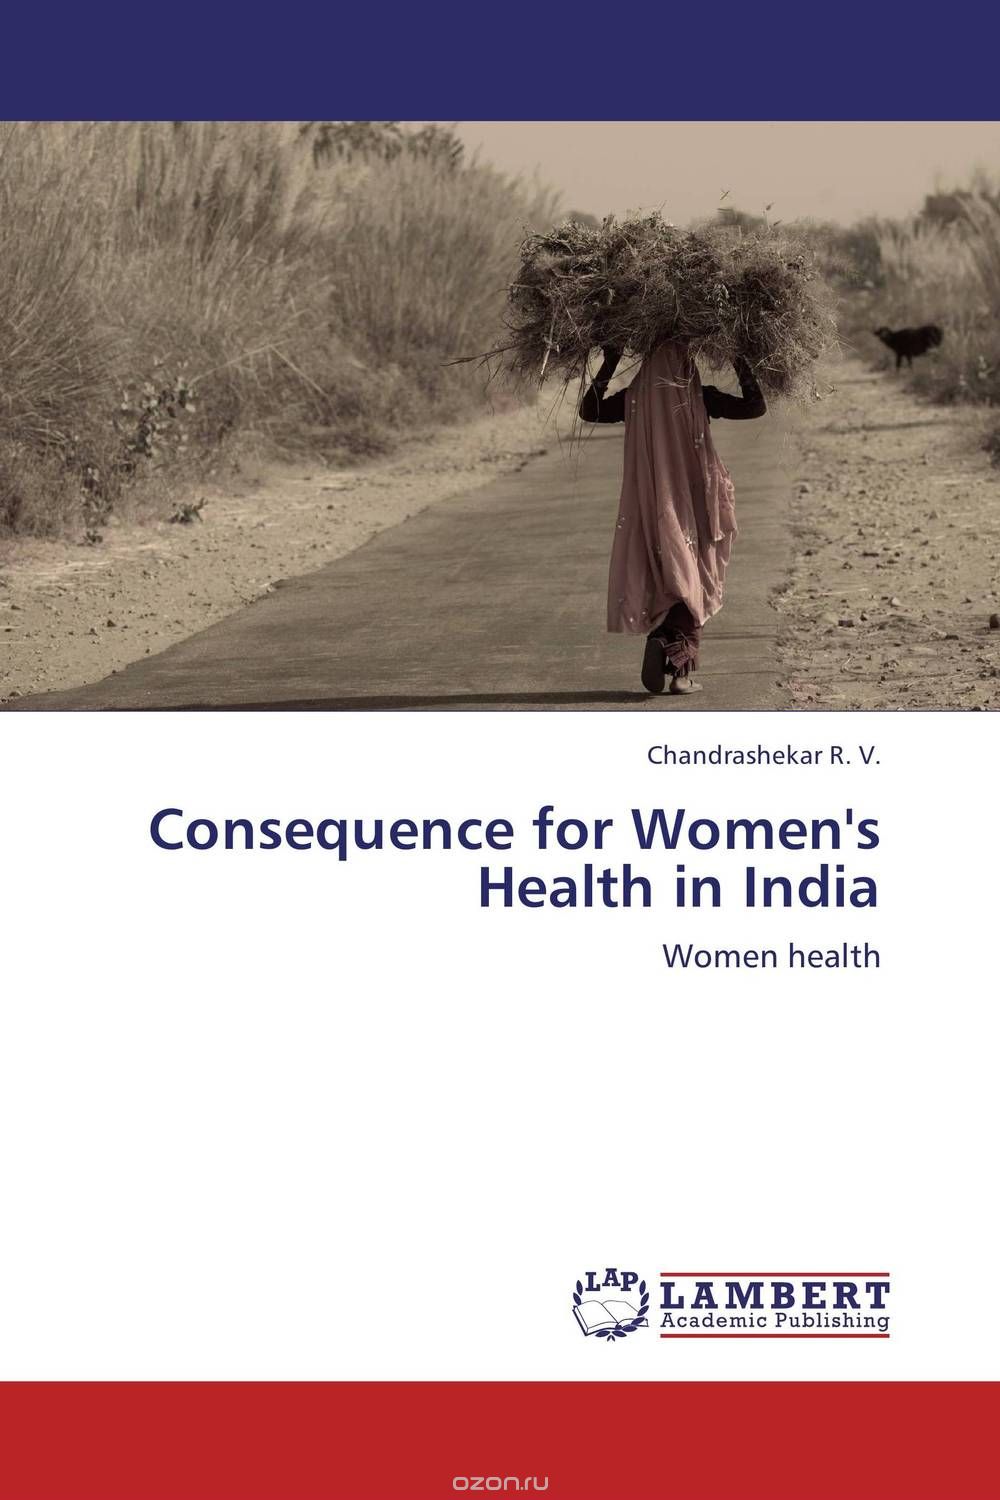 Скачать книгу "Consequence for Women's Health in India"